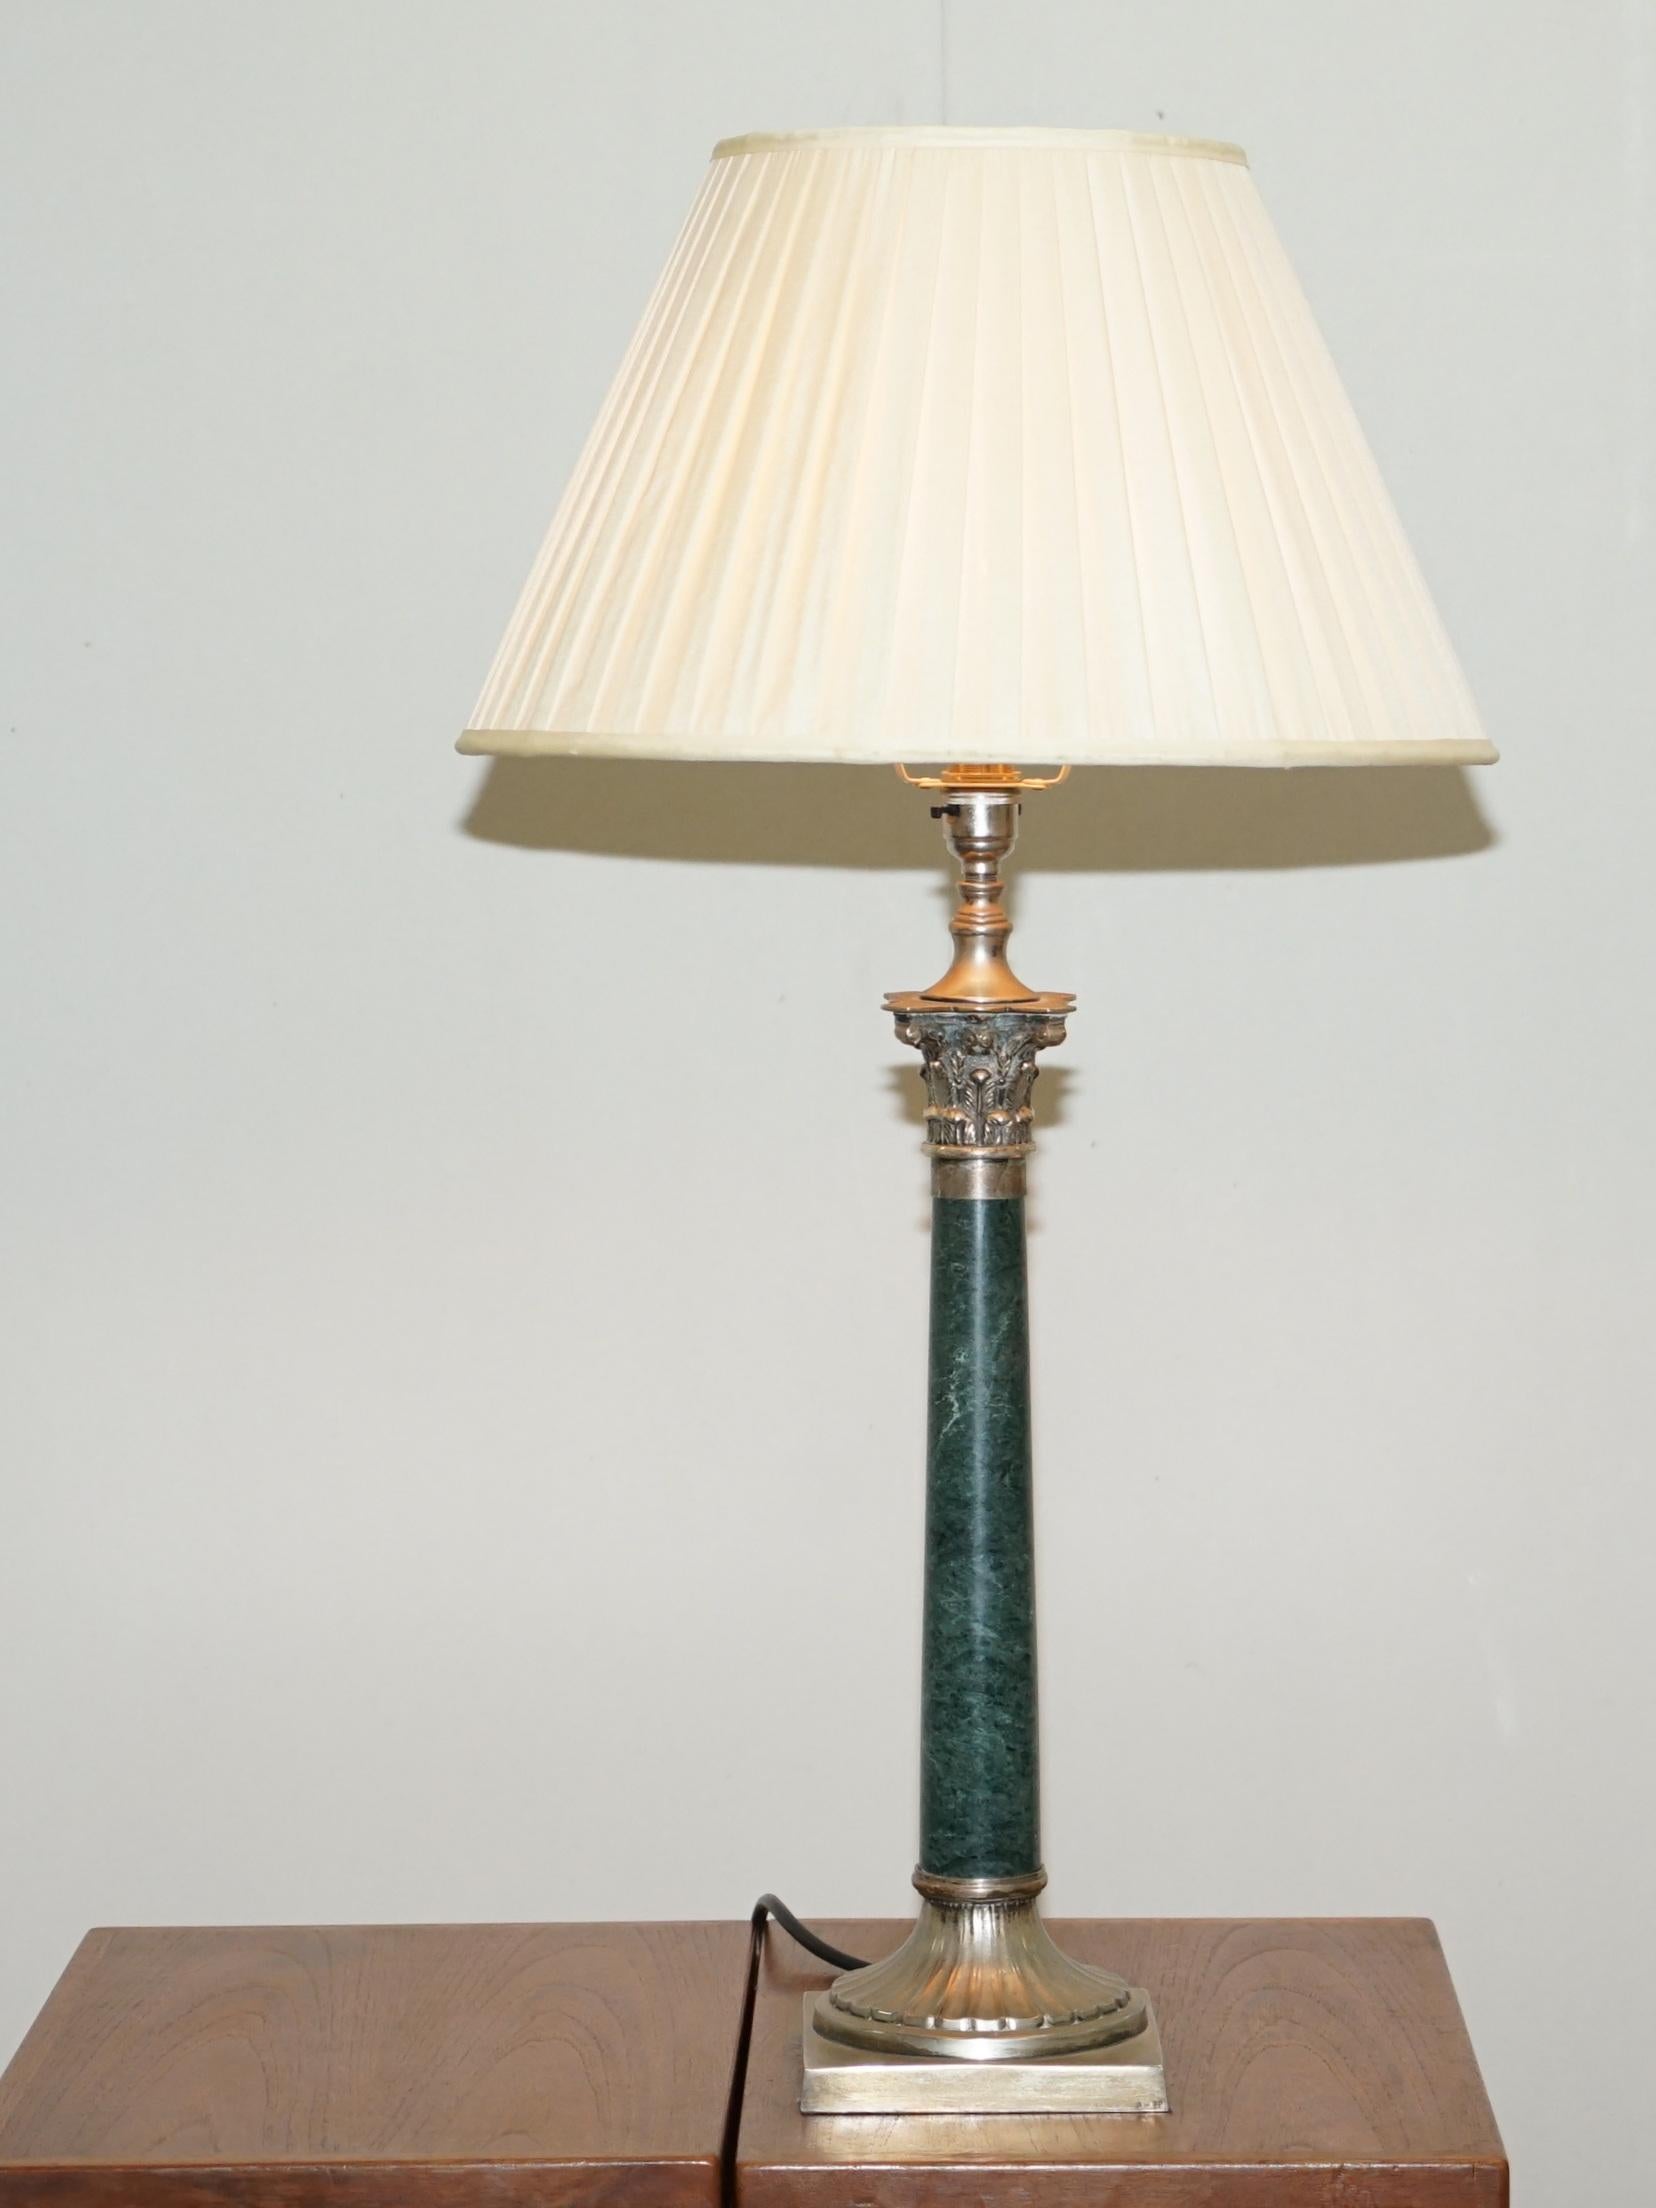 We are delighted to this lovely pair of circa 1920s green marble and silver plated Corinthian pillared table lamps

A very decorative and well-made pair of substantial and important looking table lamps. They are heavy, with solid marble columns,